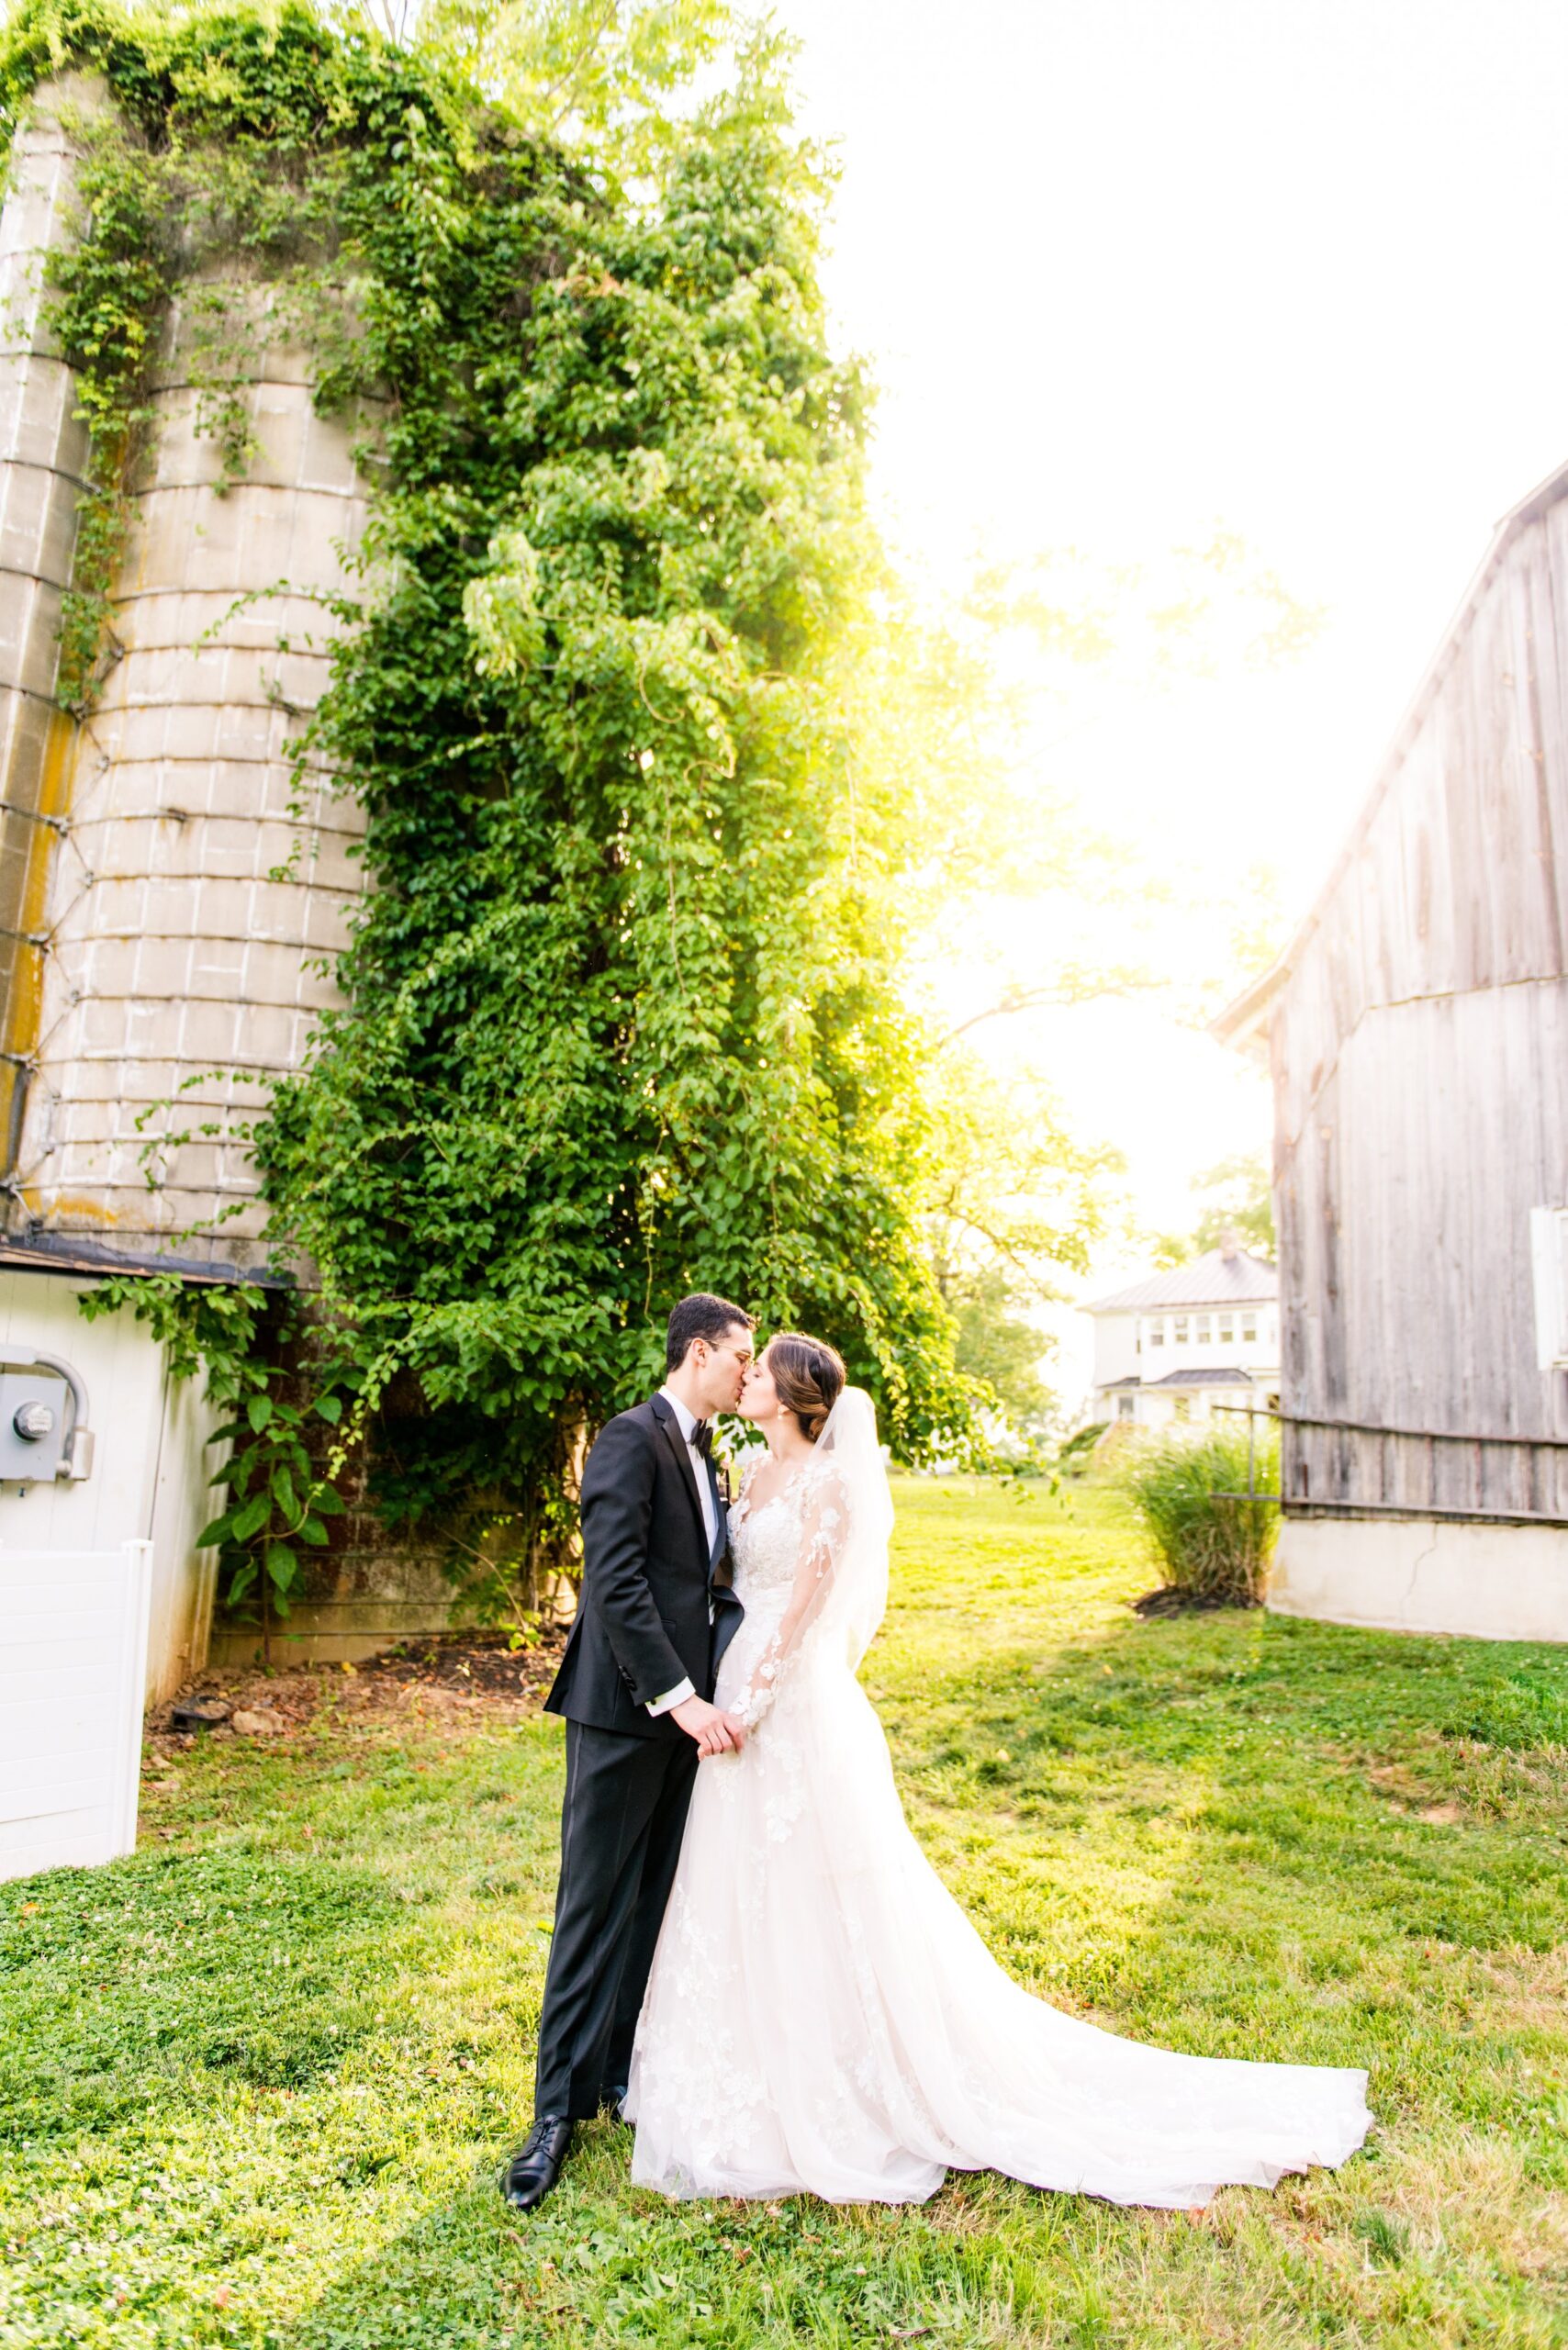 A bride and groom sharing a golden hour portrait at the best wedding venues in Loudoun County - The Barns at Hamilton Station Vineyard